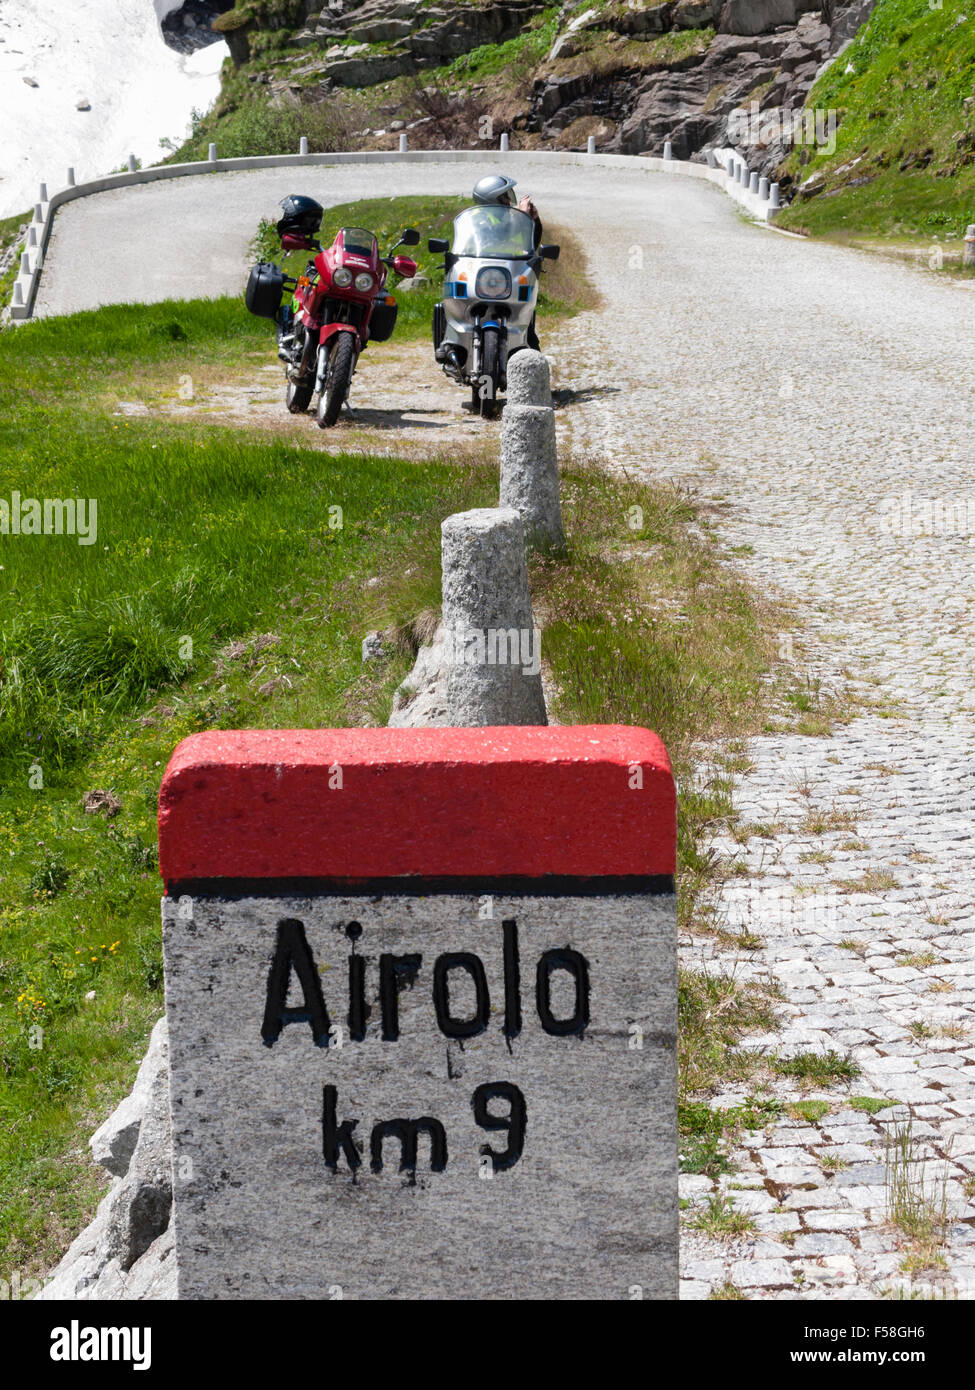 Two motorbikes are parked behind a milestone on the historic cobble stone paved Gotthard Pass road (Tremola) in the Swiss alps. Stock Photo